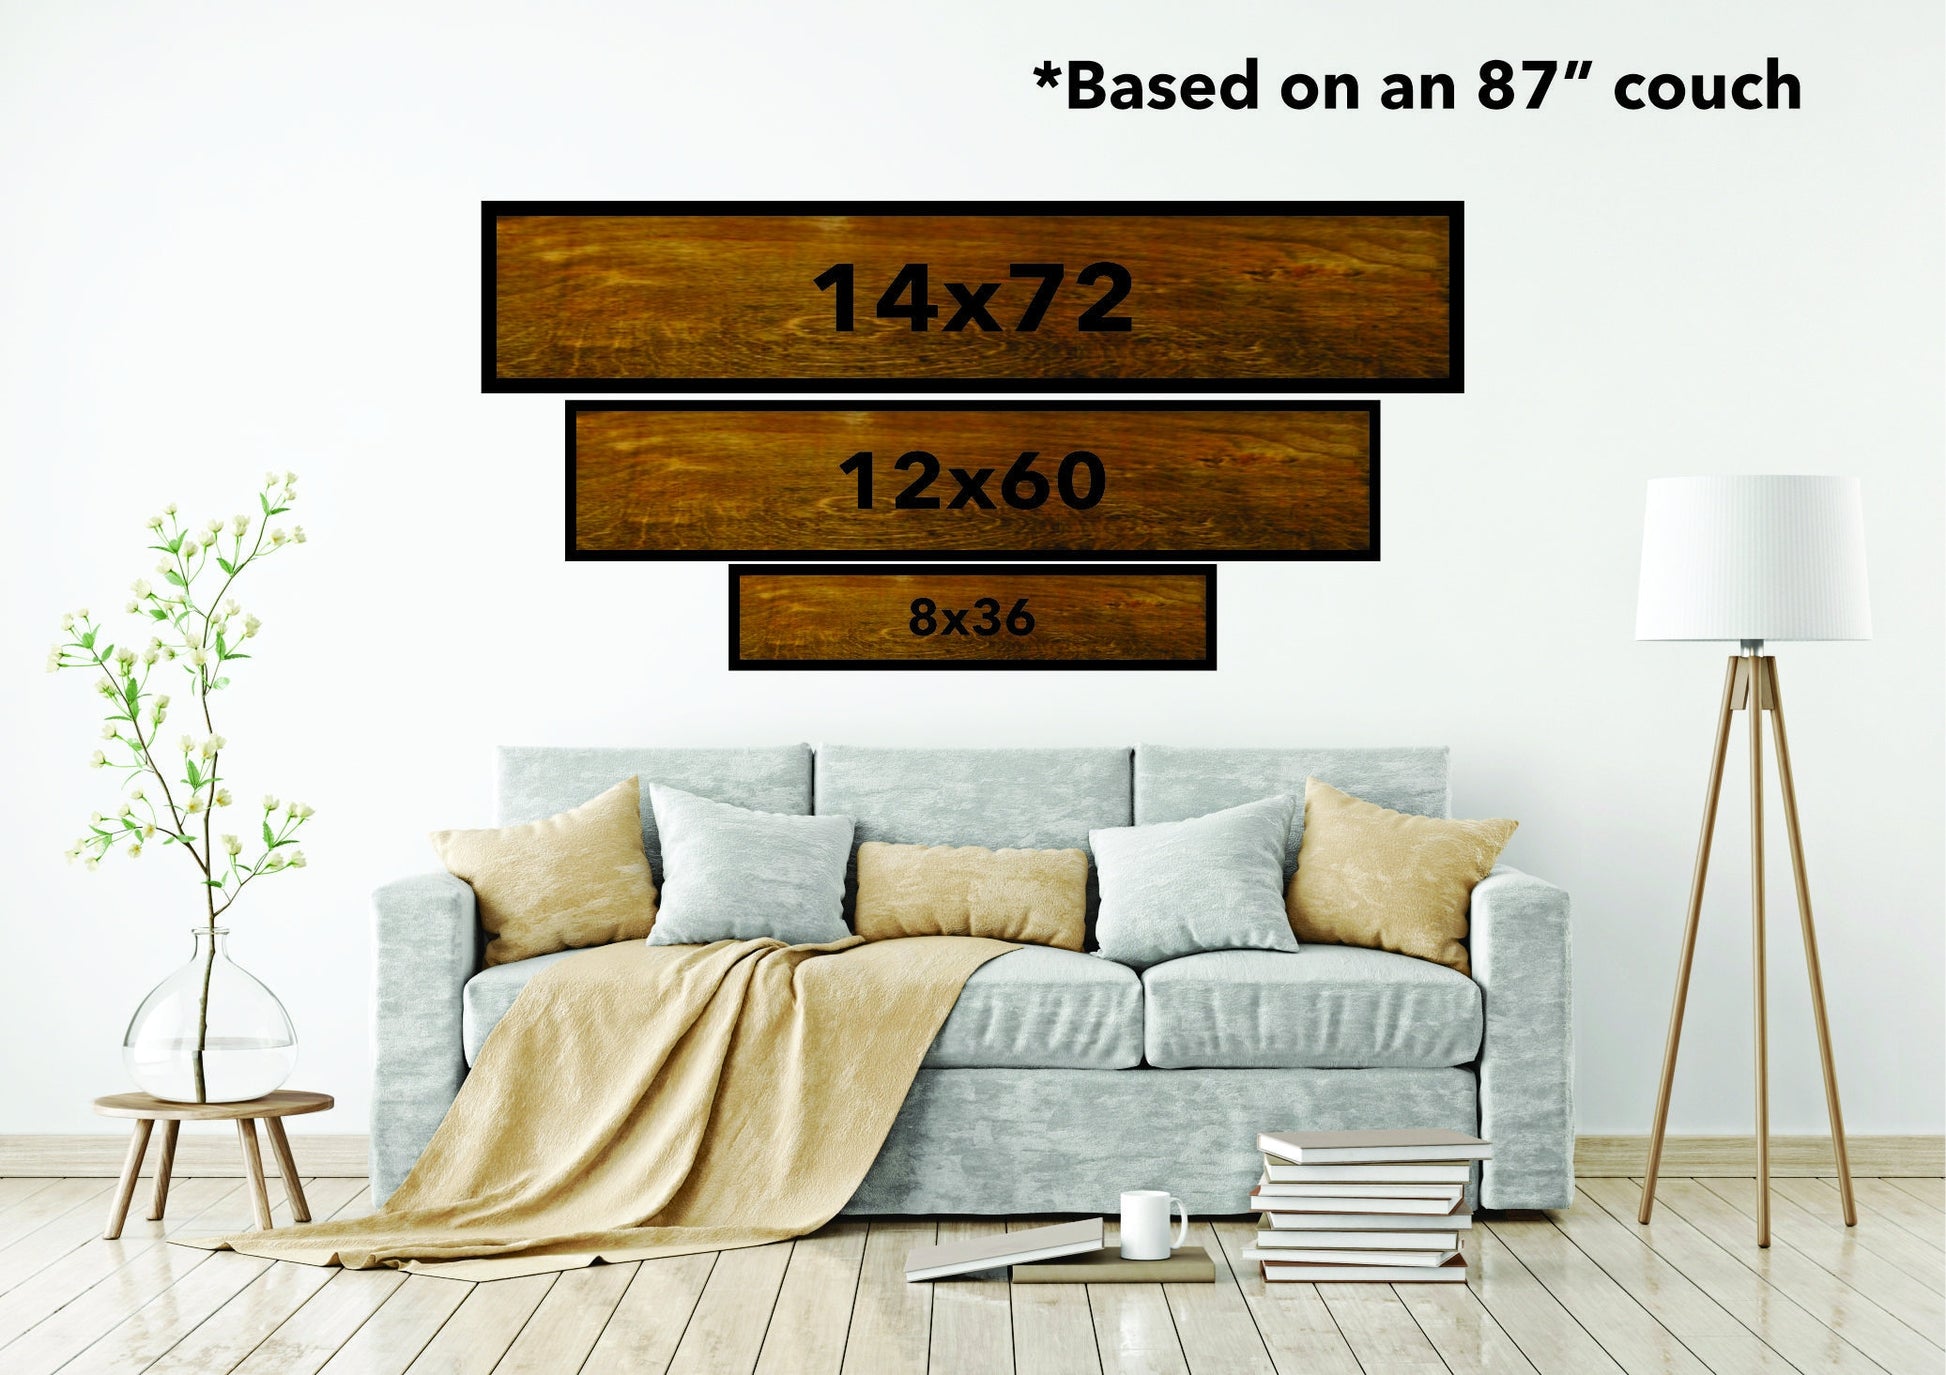 Inspiring Quote Sign Make today amazing Large family sign wood fireplace living room dinning room shabby cottage chic farmhouse rustic decor